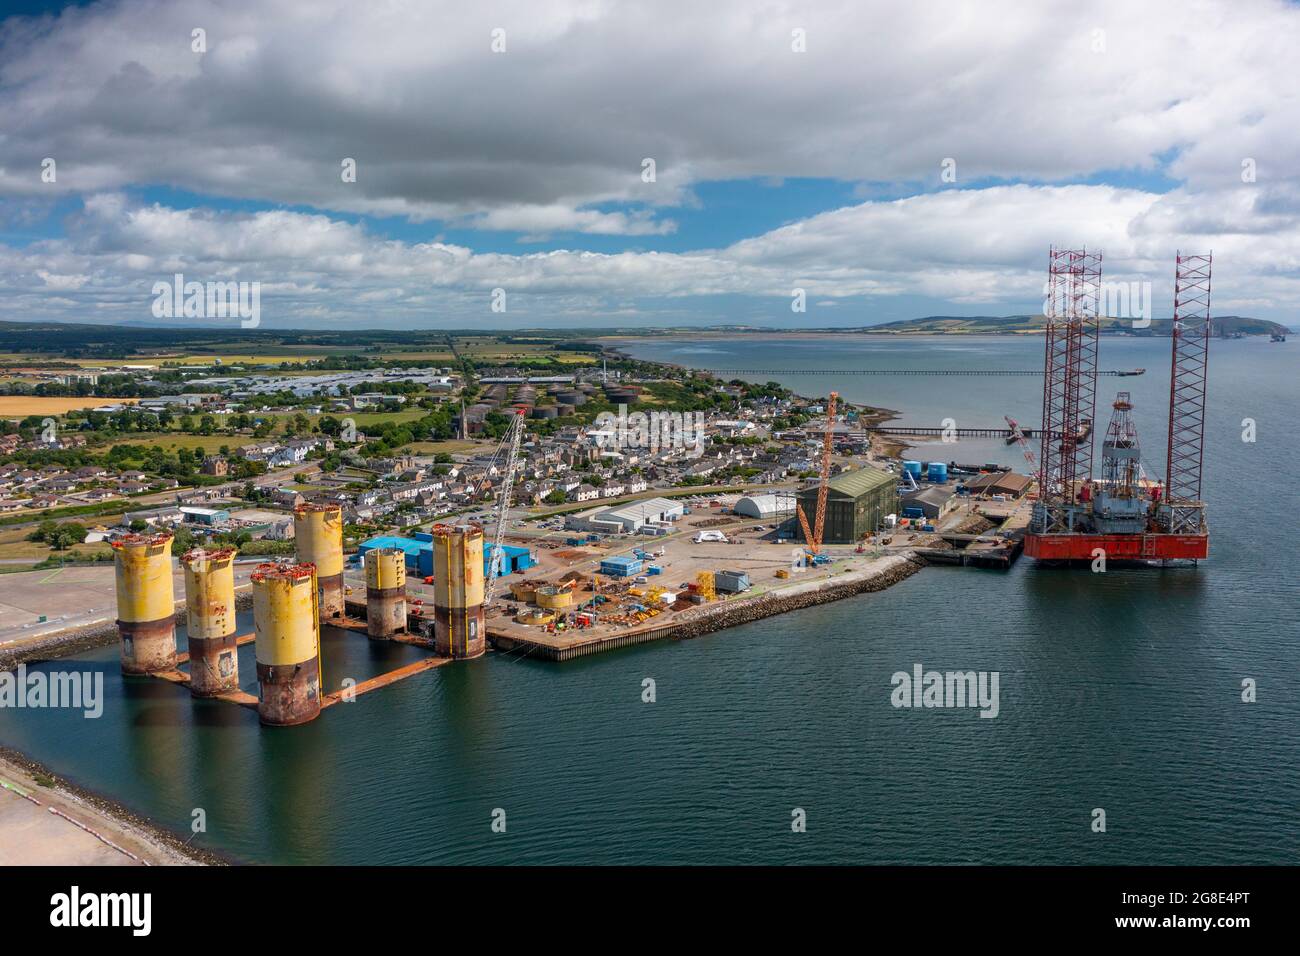 Aerial view from drone of Port of Cromarty Firth at Invergordon, Cromarty Firth, Scotland, UK Stock Photo